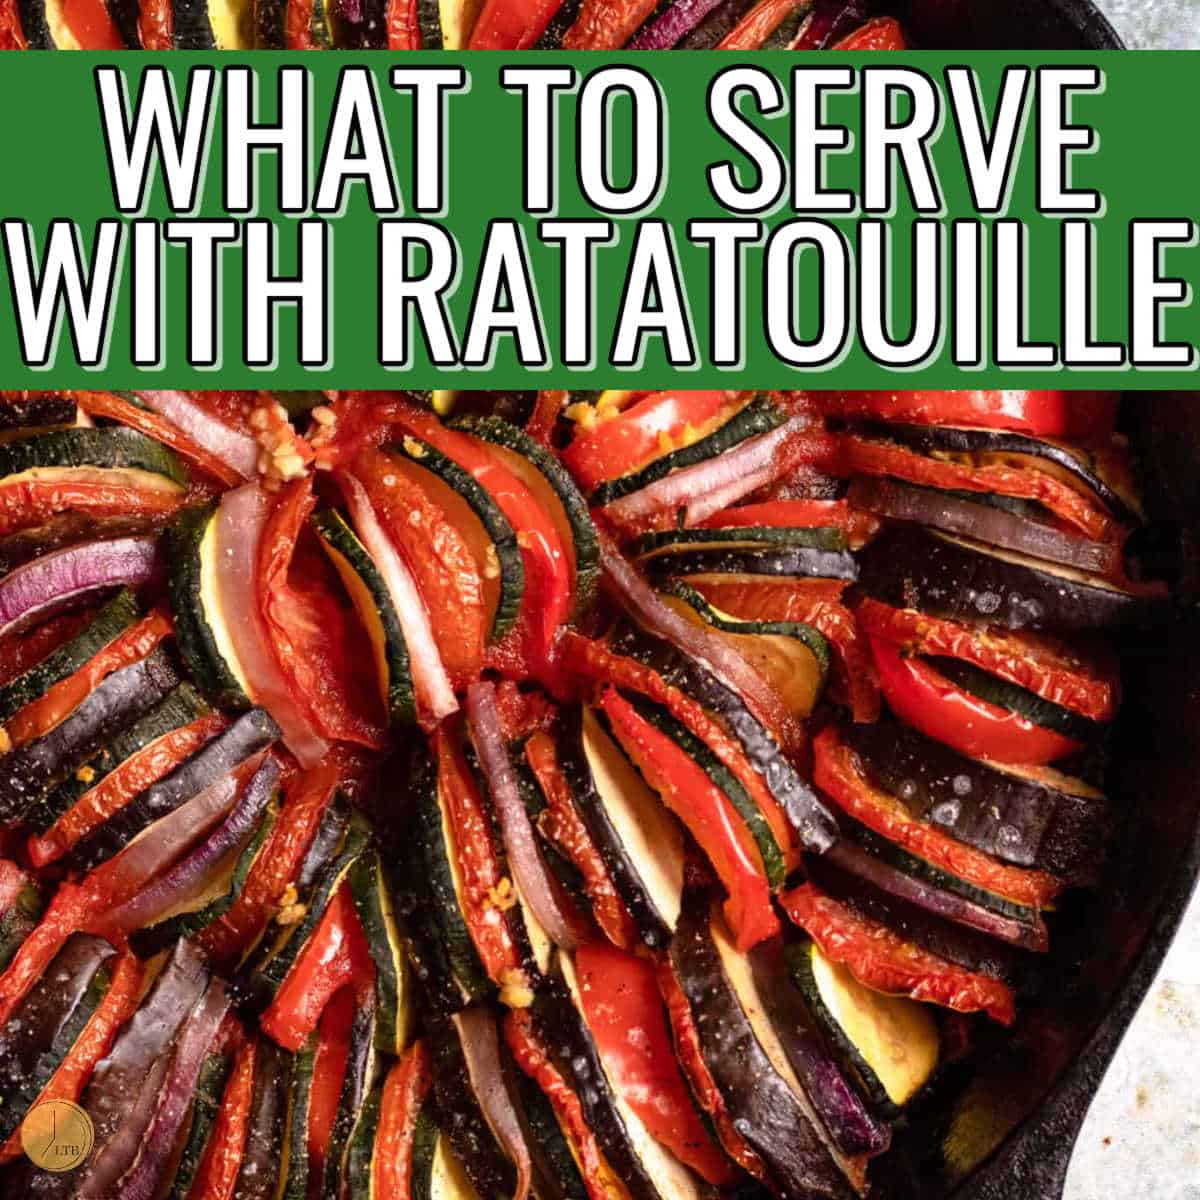 Cast iron pan of ratatouille with text "what to serve with ratatouille" on top. 